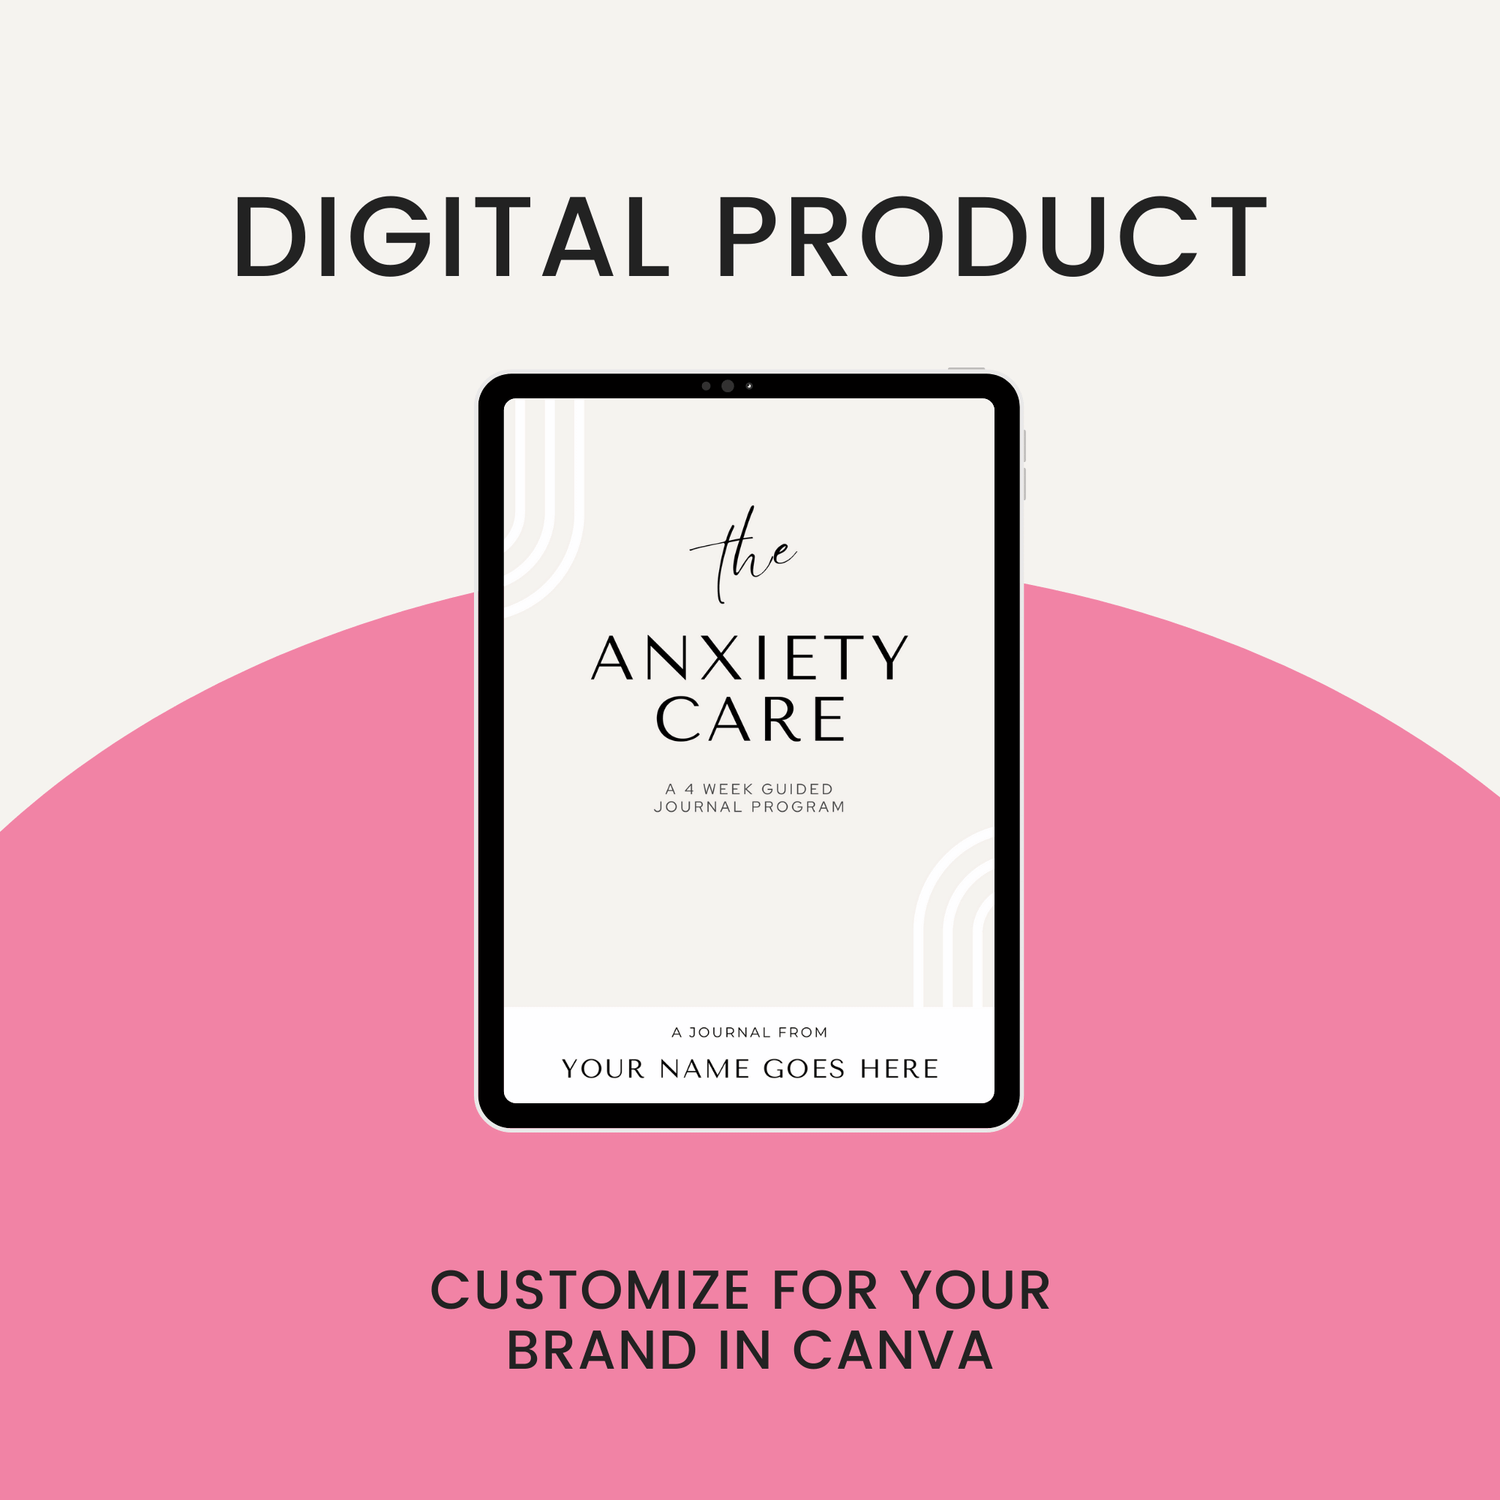 Anxiety Care Journal Digital Customize for Your Brand in Canva